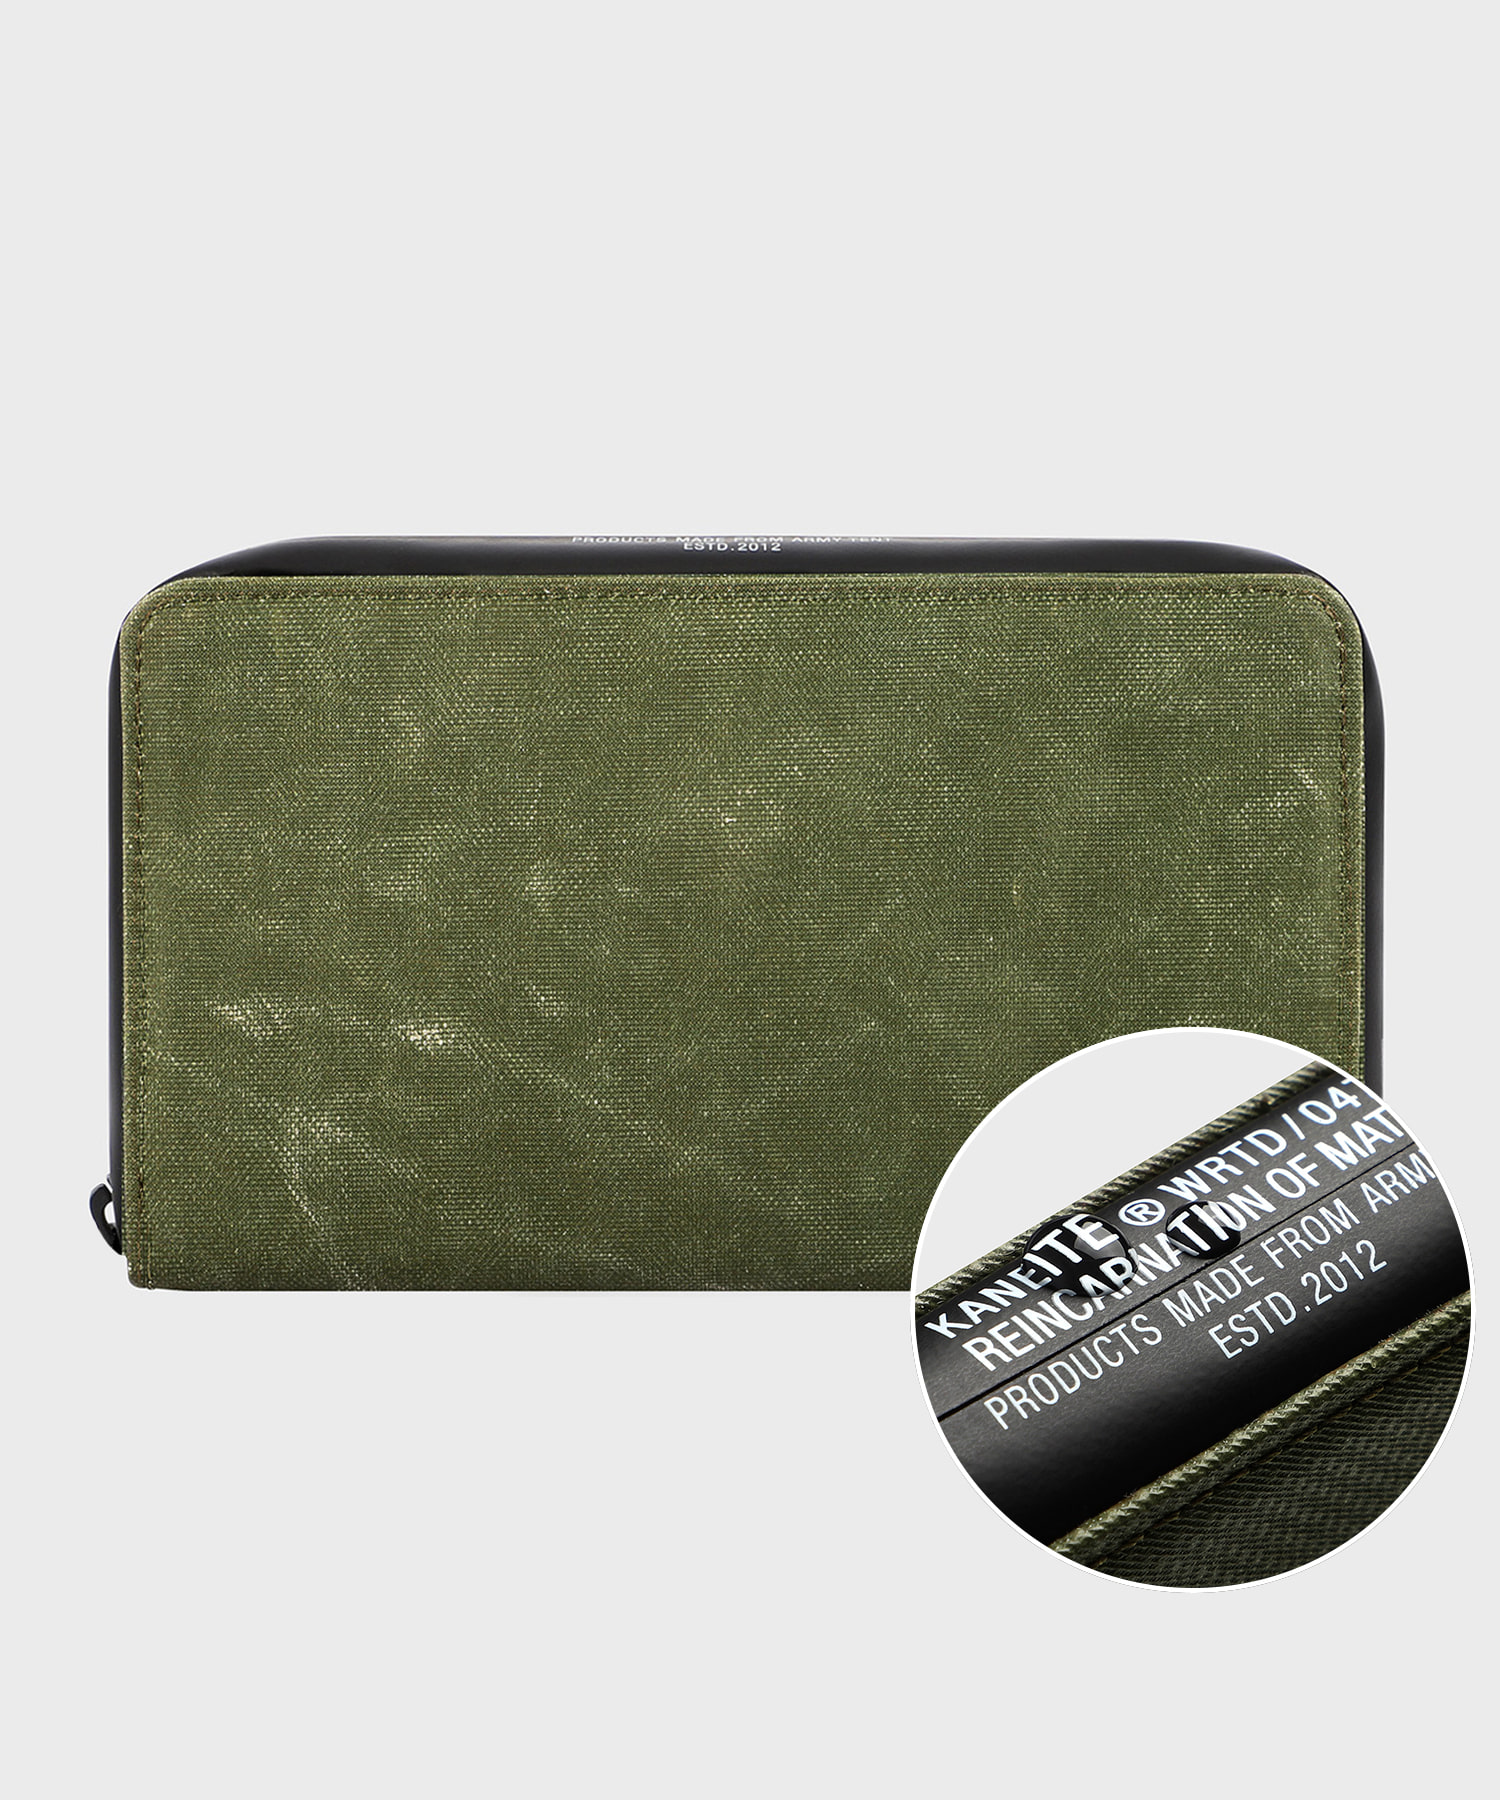 BERLIN ZIP WALLET L (OLIVE DRAB) / UPCYCLED